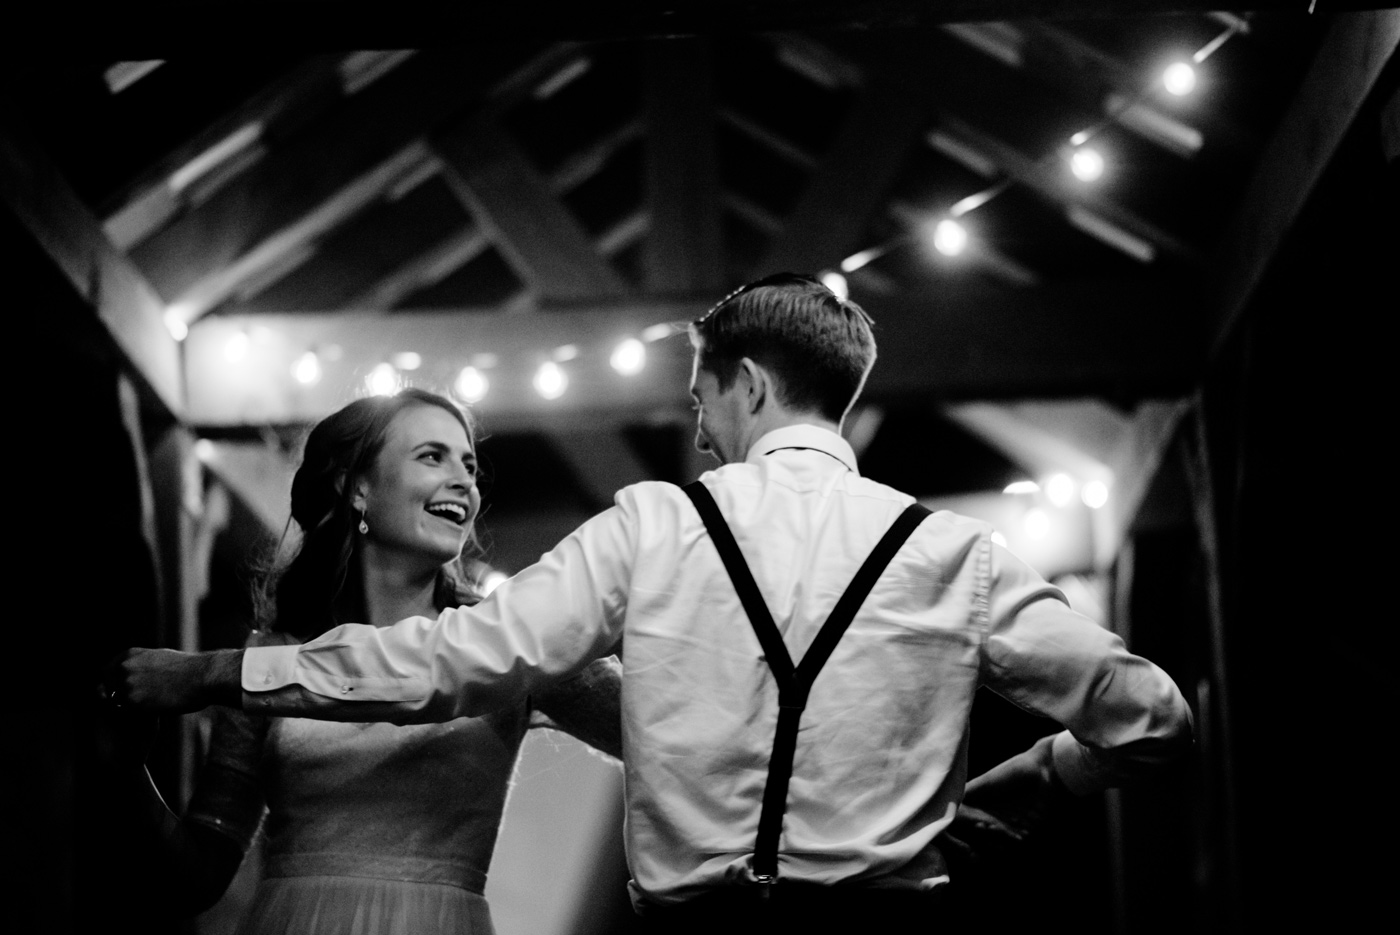 bride and groom dance alone at the end of the night